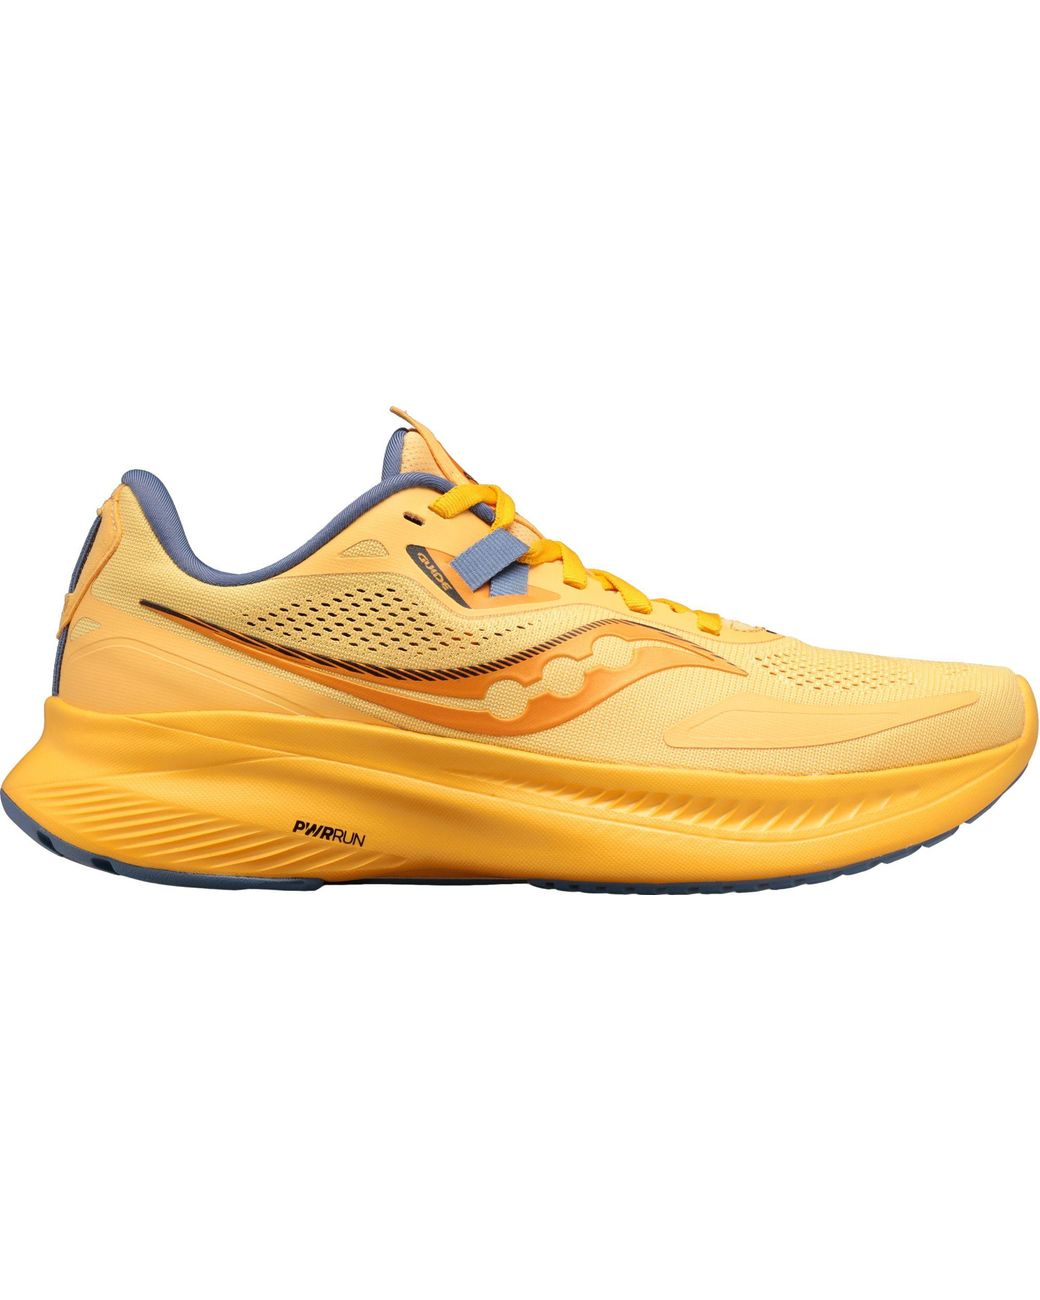 Saucony Rubber Guide 15 Running Shoes in Gold (Metallic) | Lyst